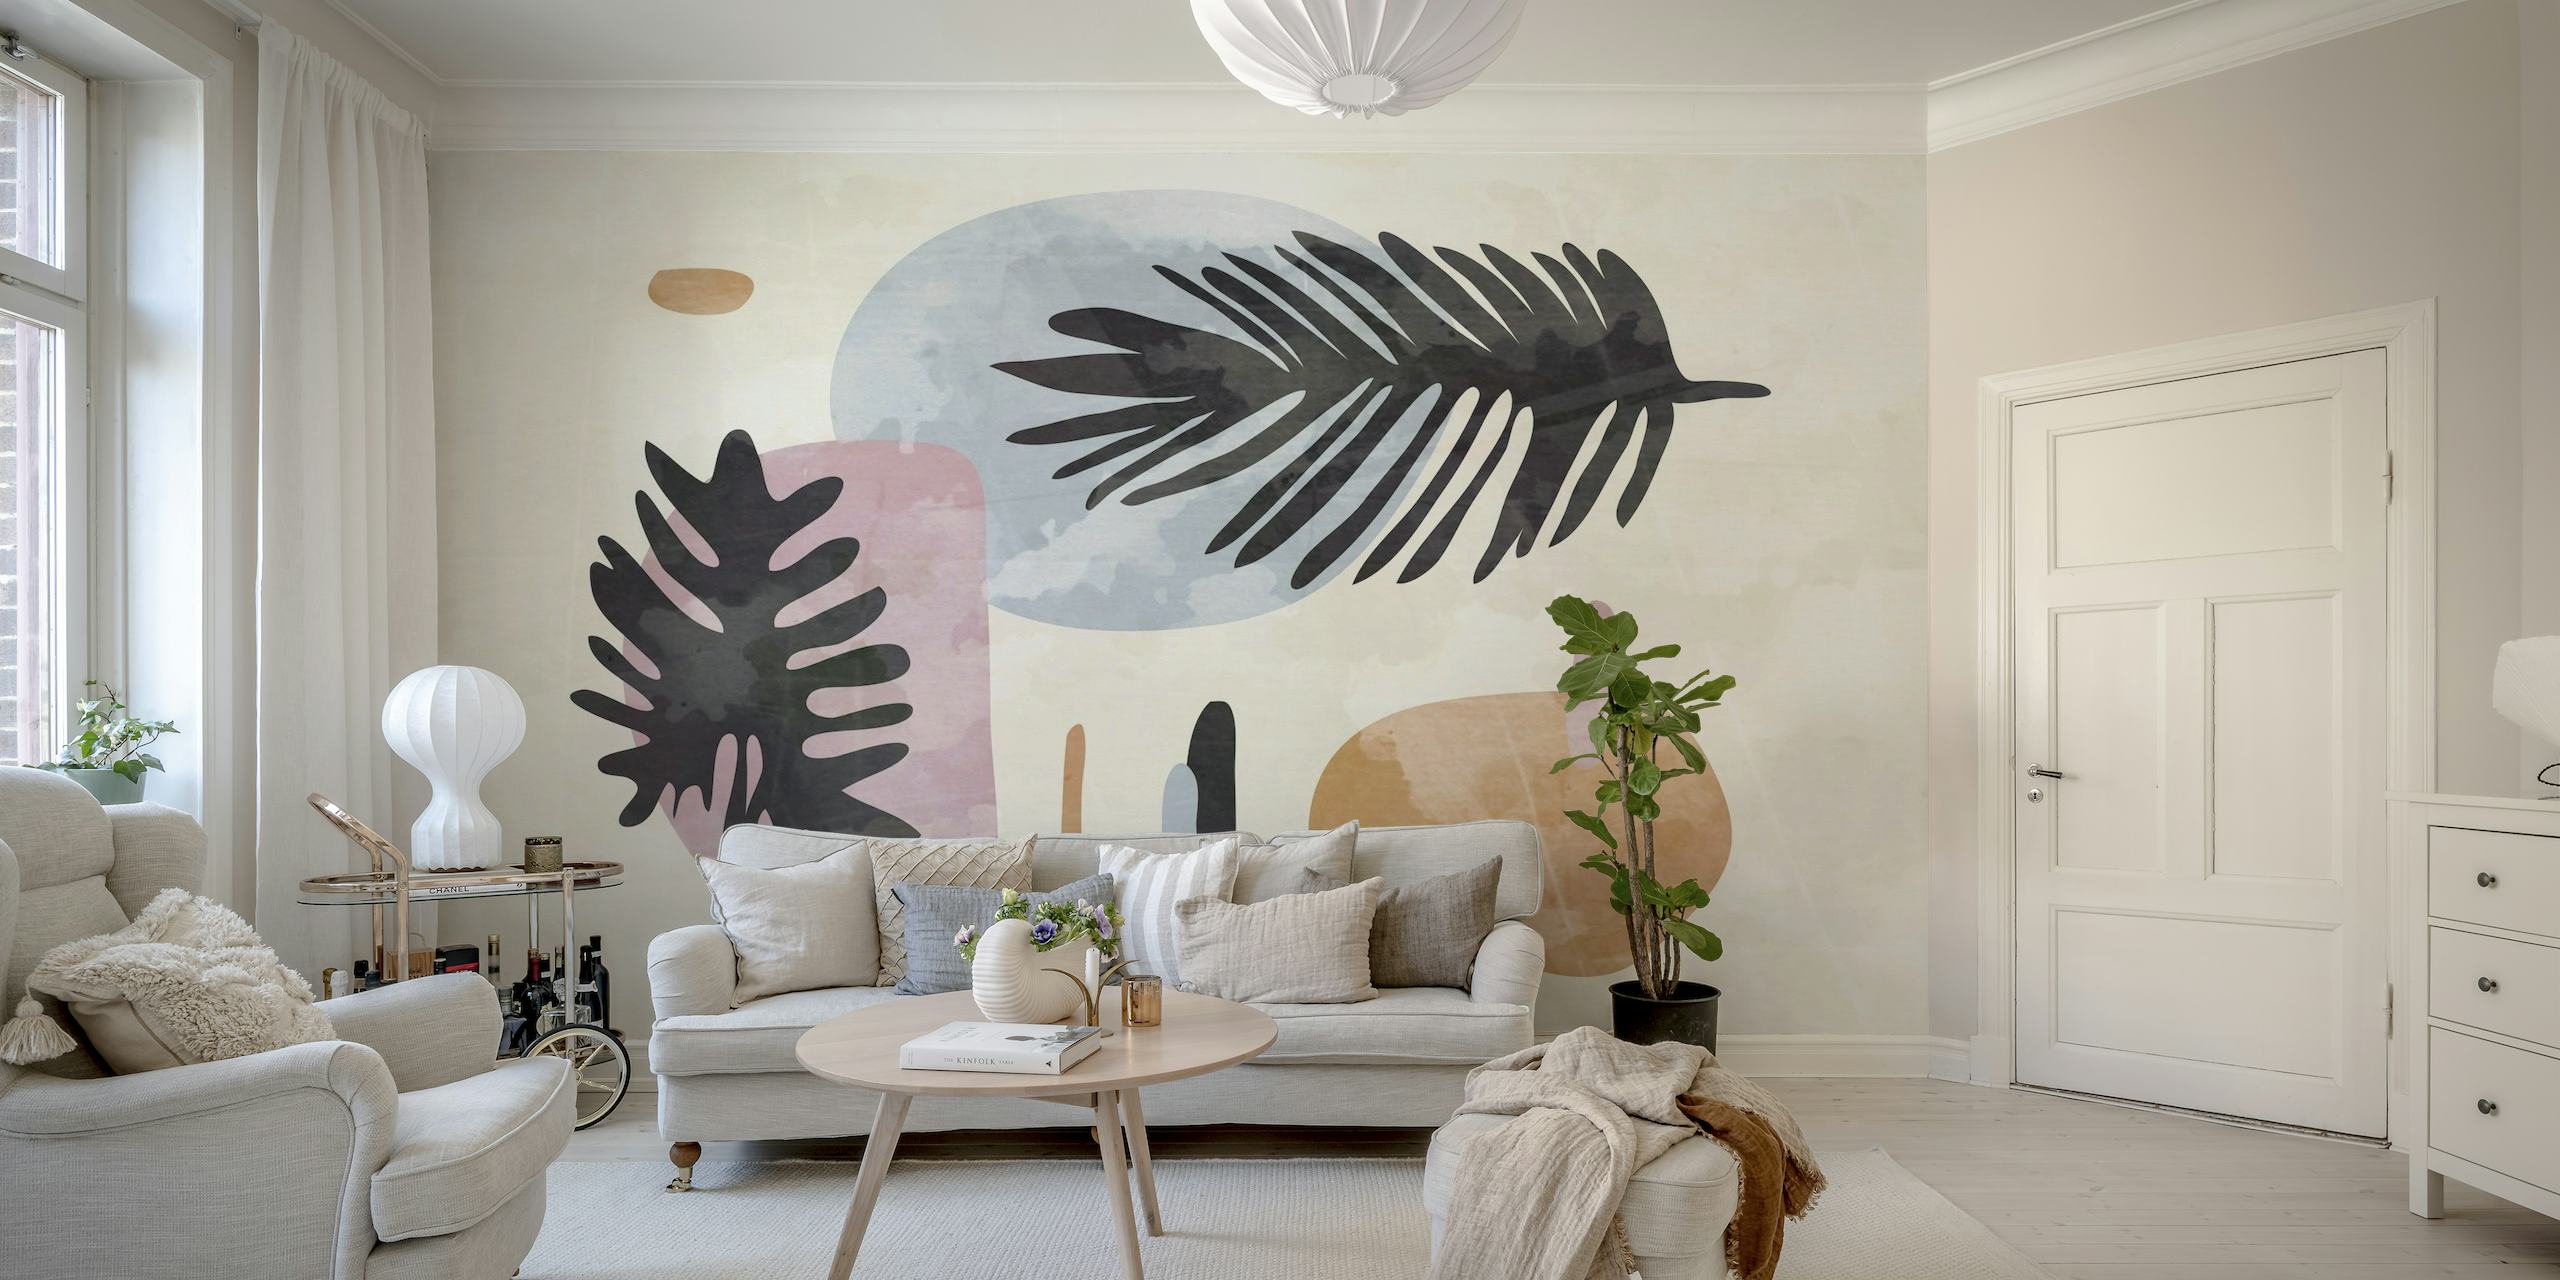 Retro-styled wall mural with stylized 1960s leaf patterns in earthy tones